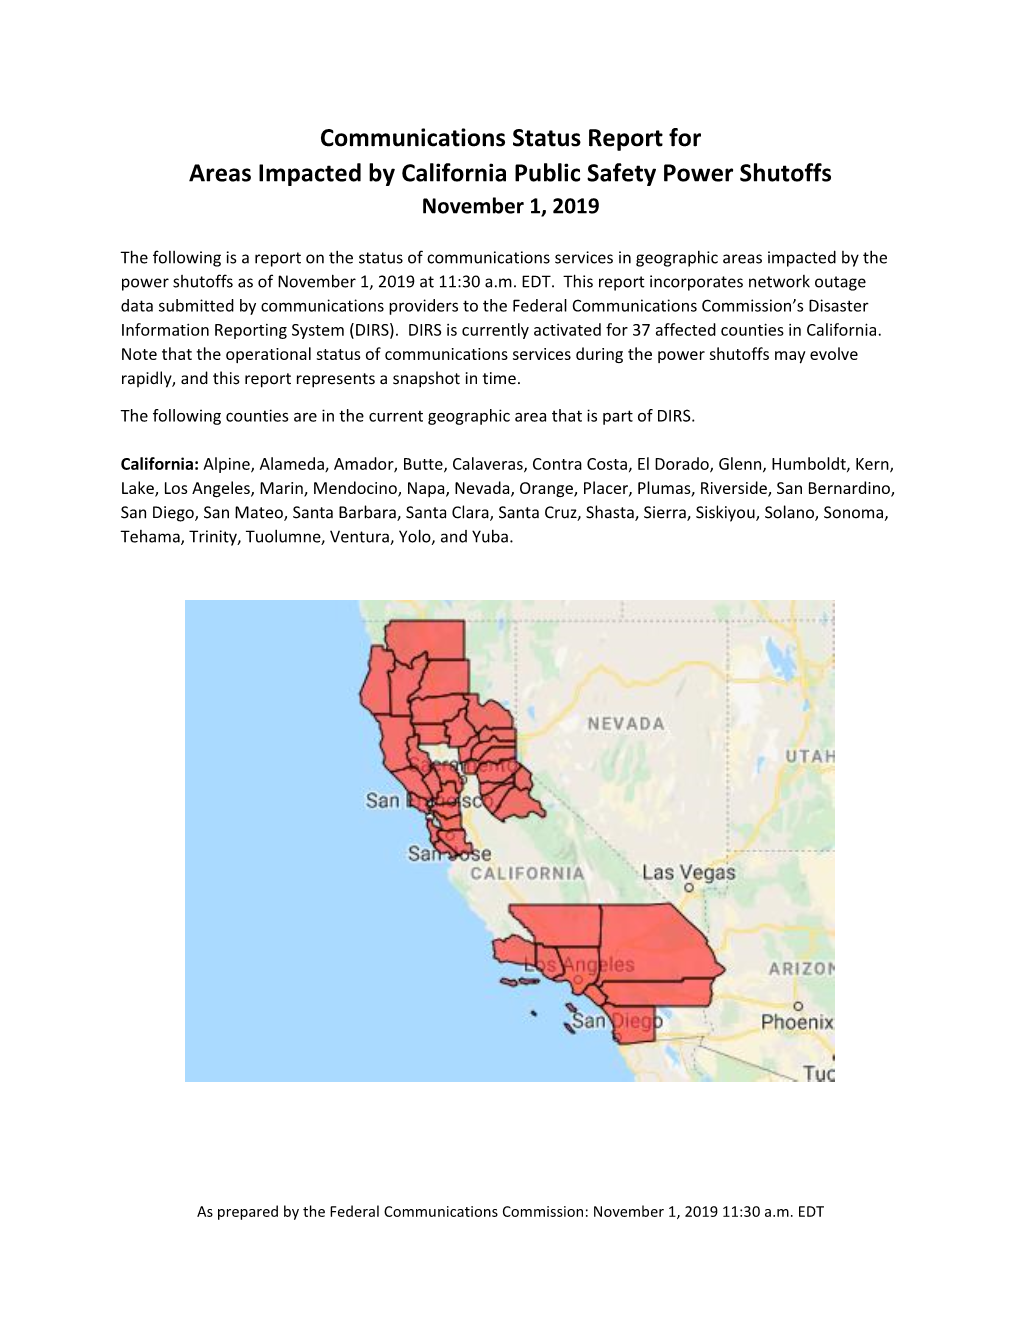 Communications Status Report for Areas Impacted by California Public Safety Power Shutoffs November 1, 2019